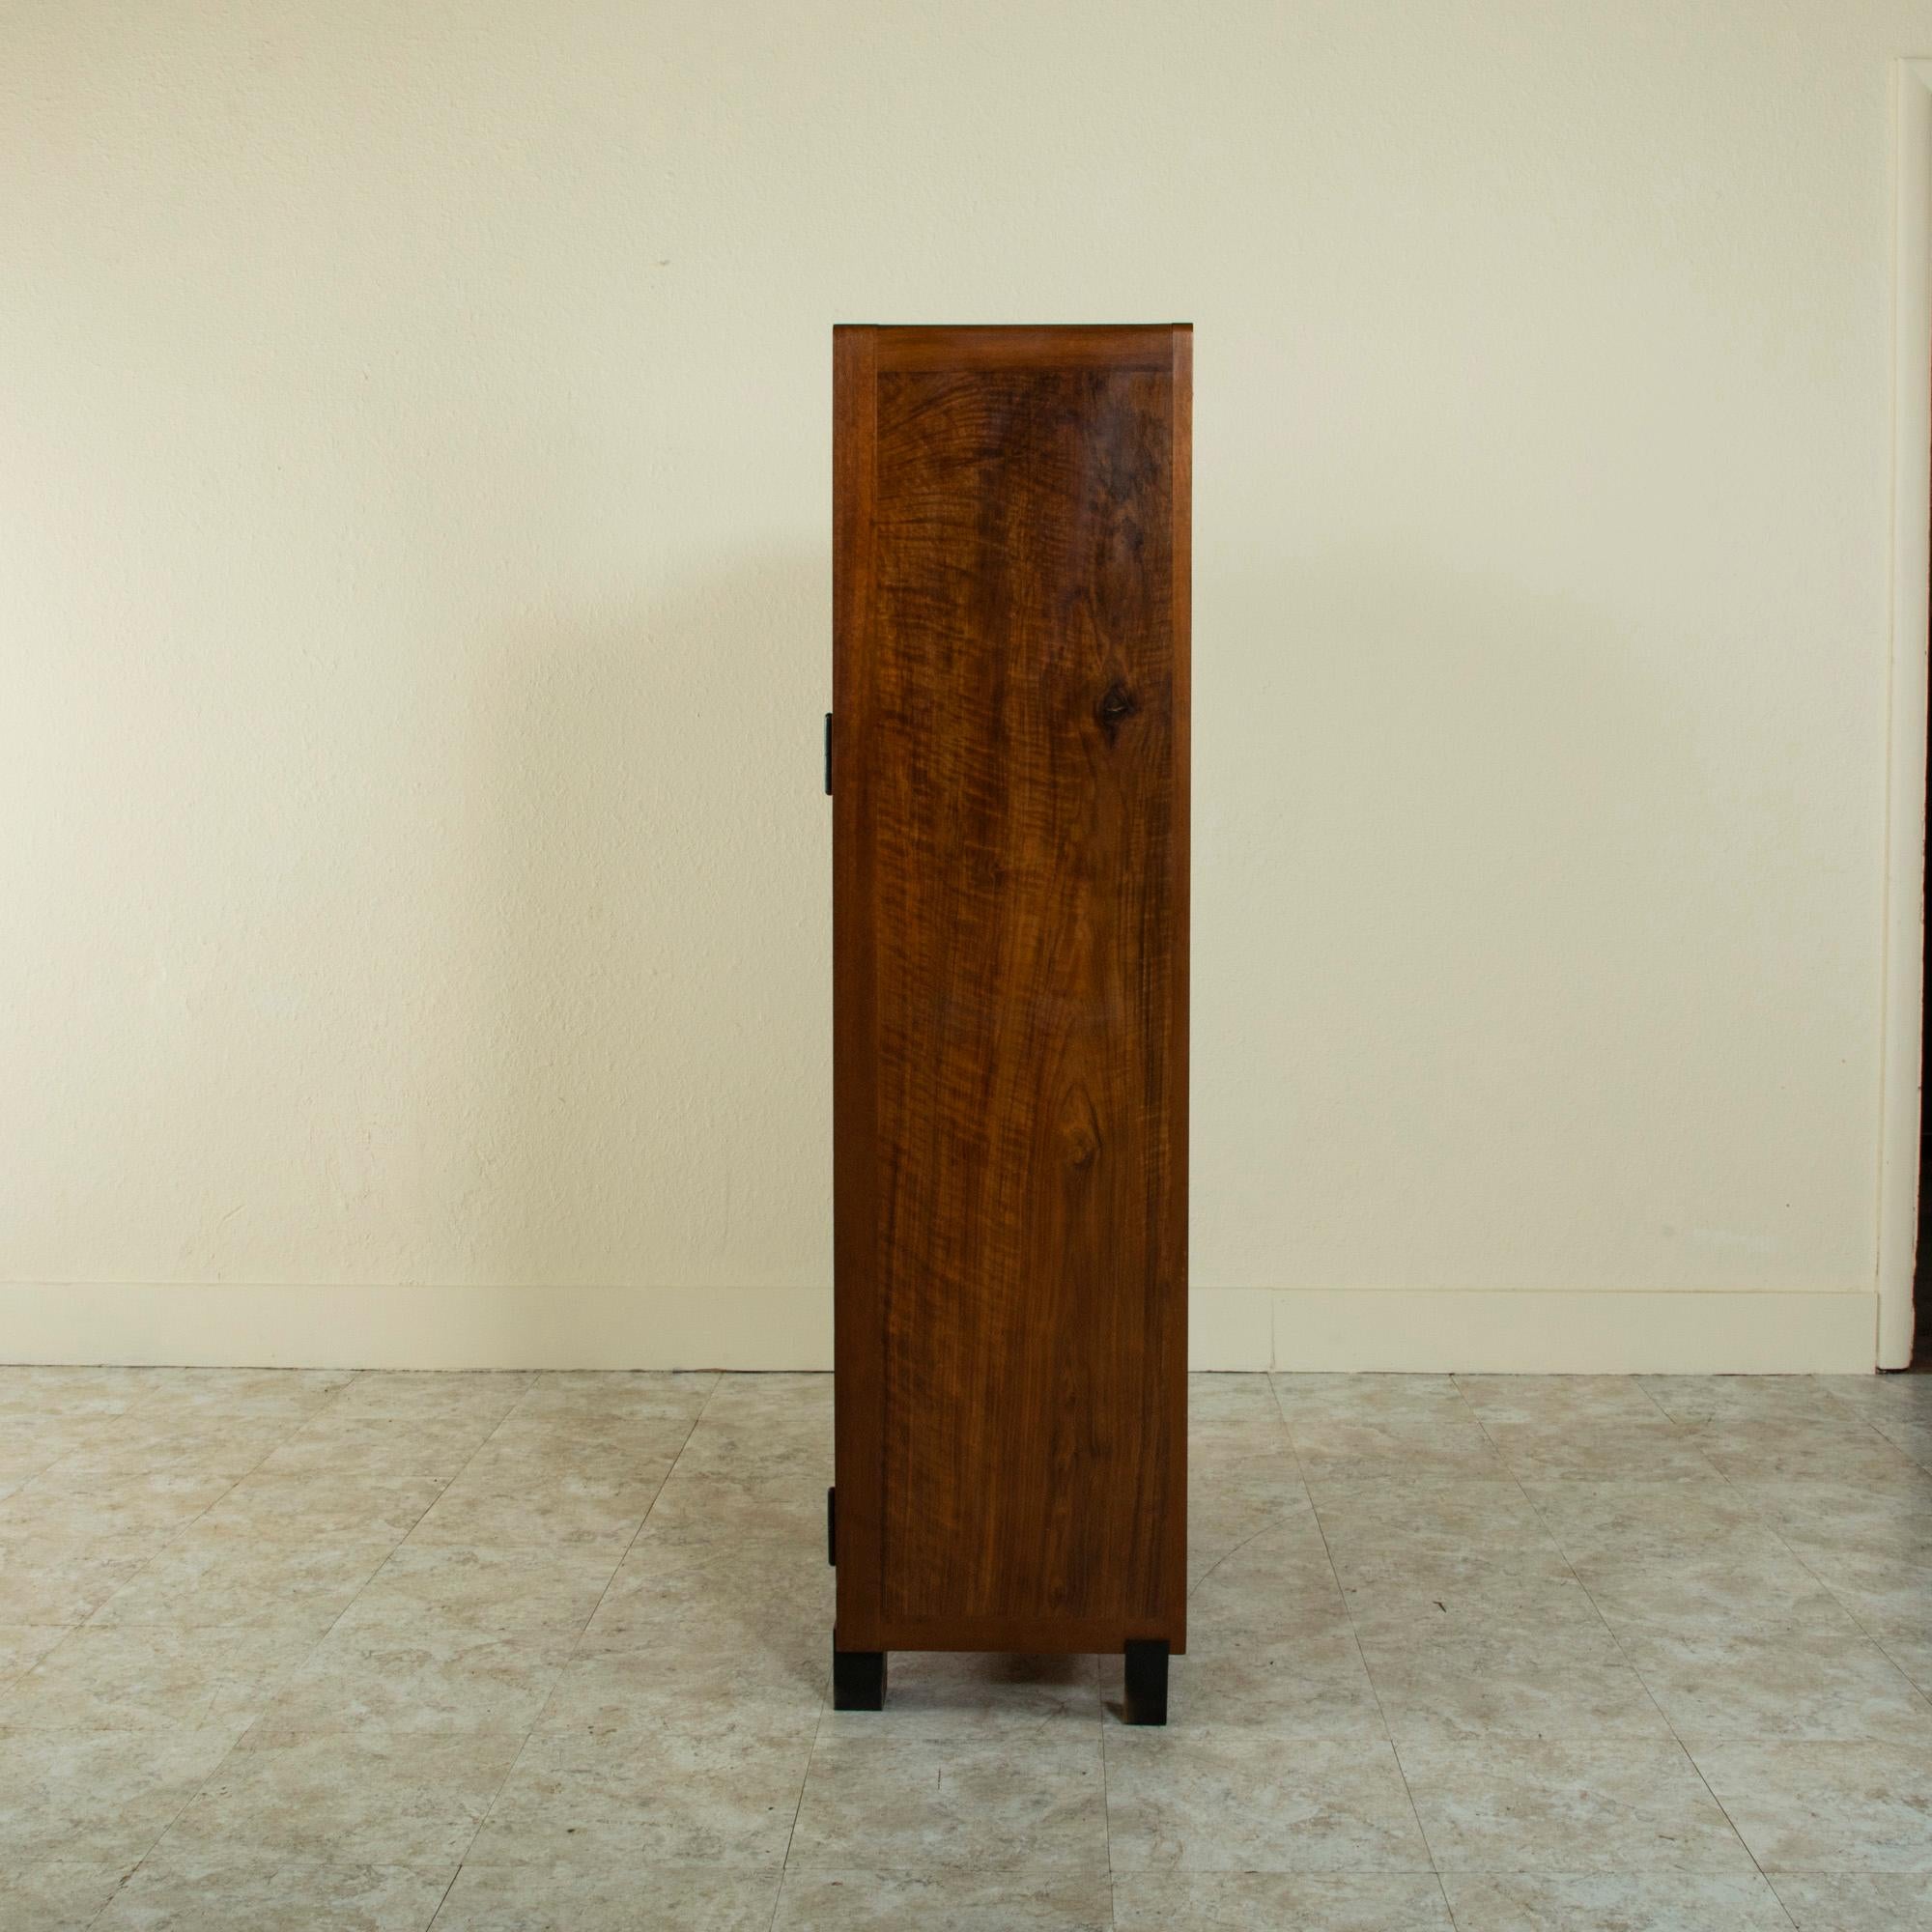 This early twentieth century French Art Deco cabinet is constructed of book matched walnut and is signed by the well known cabinet maker Maurice Alet (1874-1967). Alet began his career by studying at the Ecole des Beaux Arts in Toulouse from 1890 to